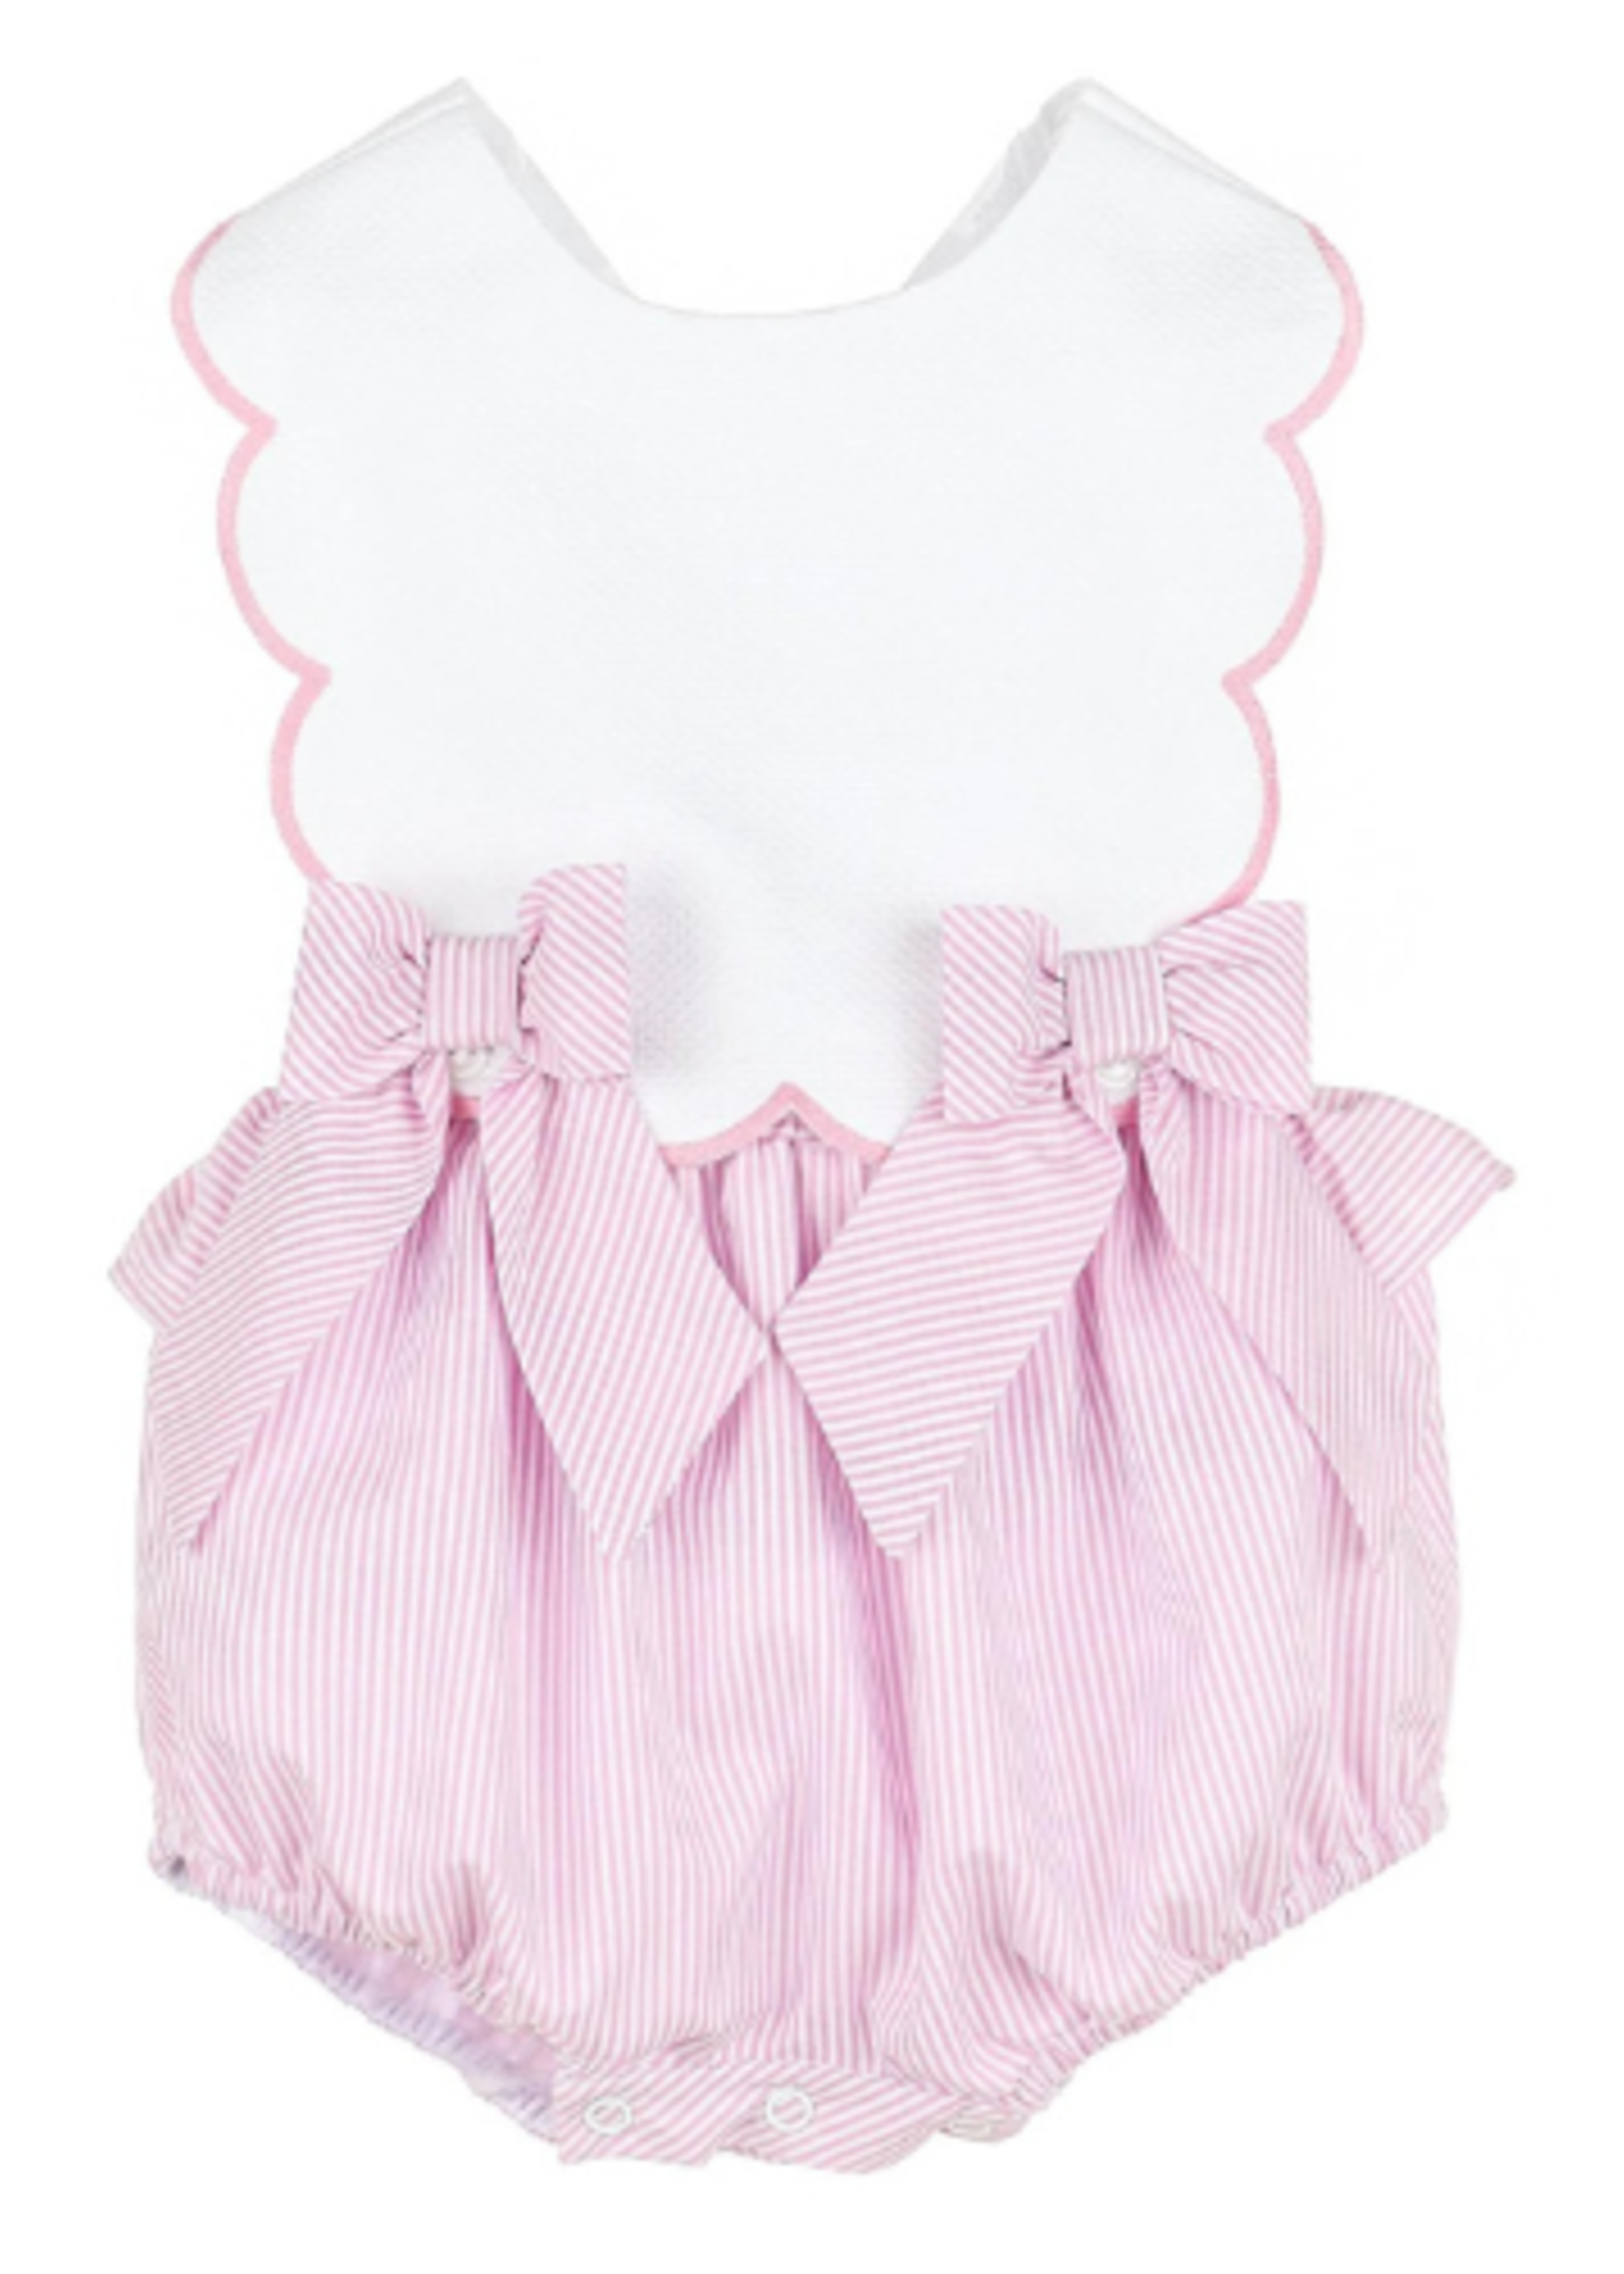 Sophie & Lucas Pink Lakeside Stripes Saylor Overall